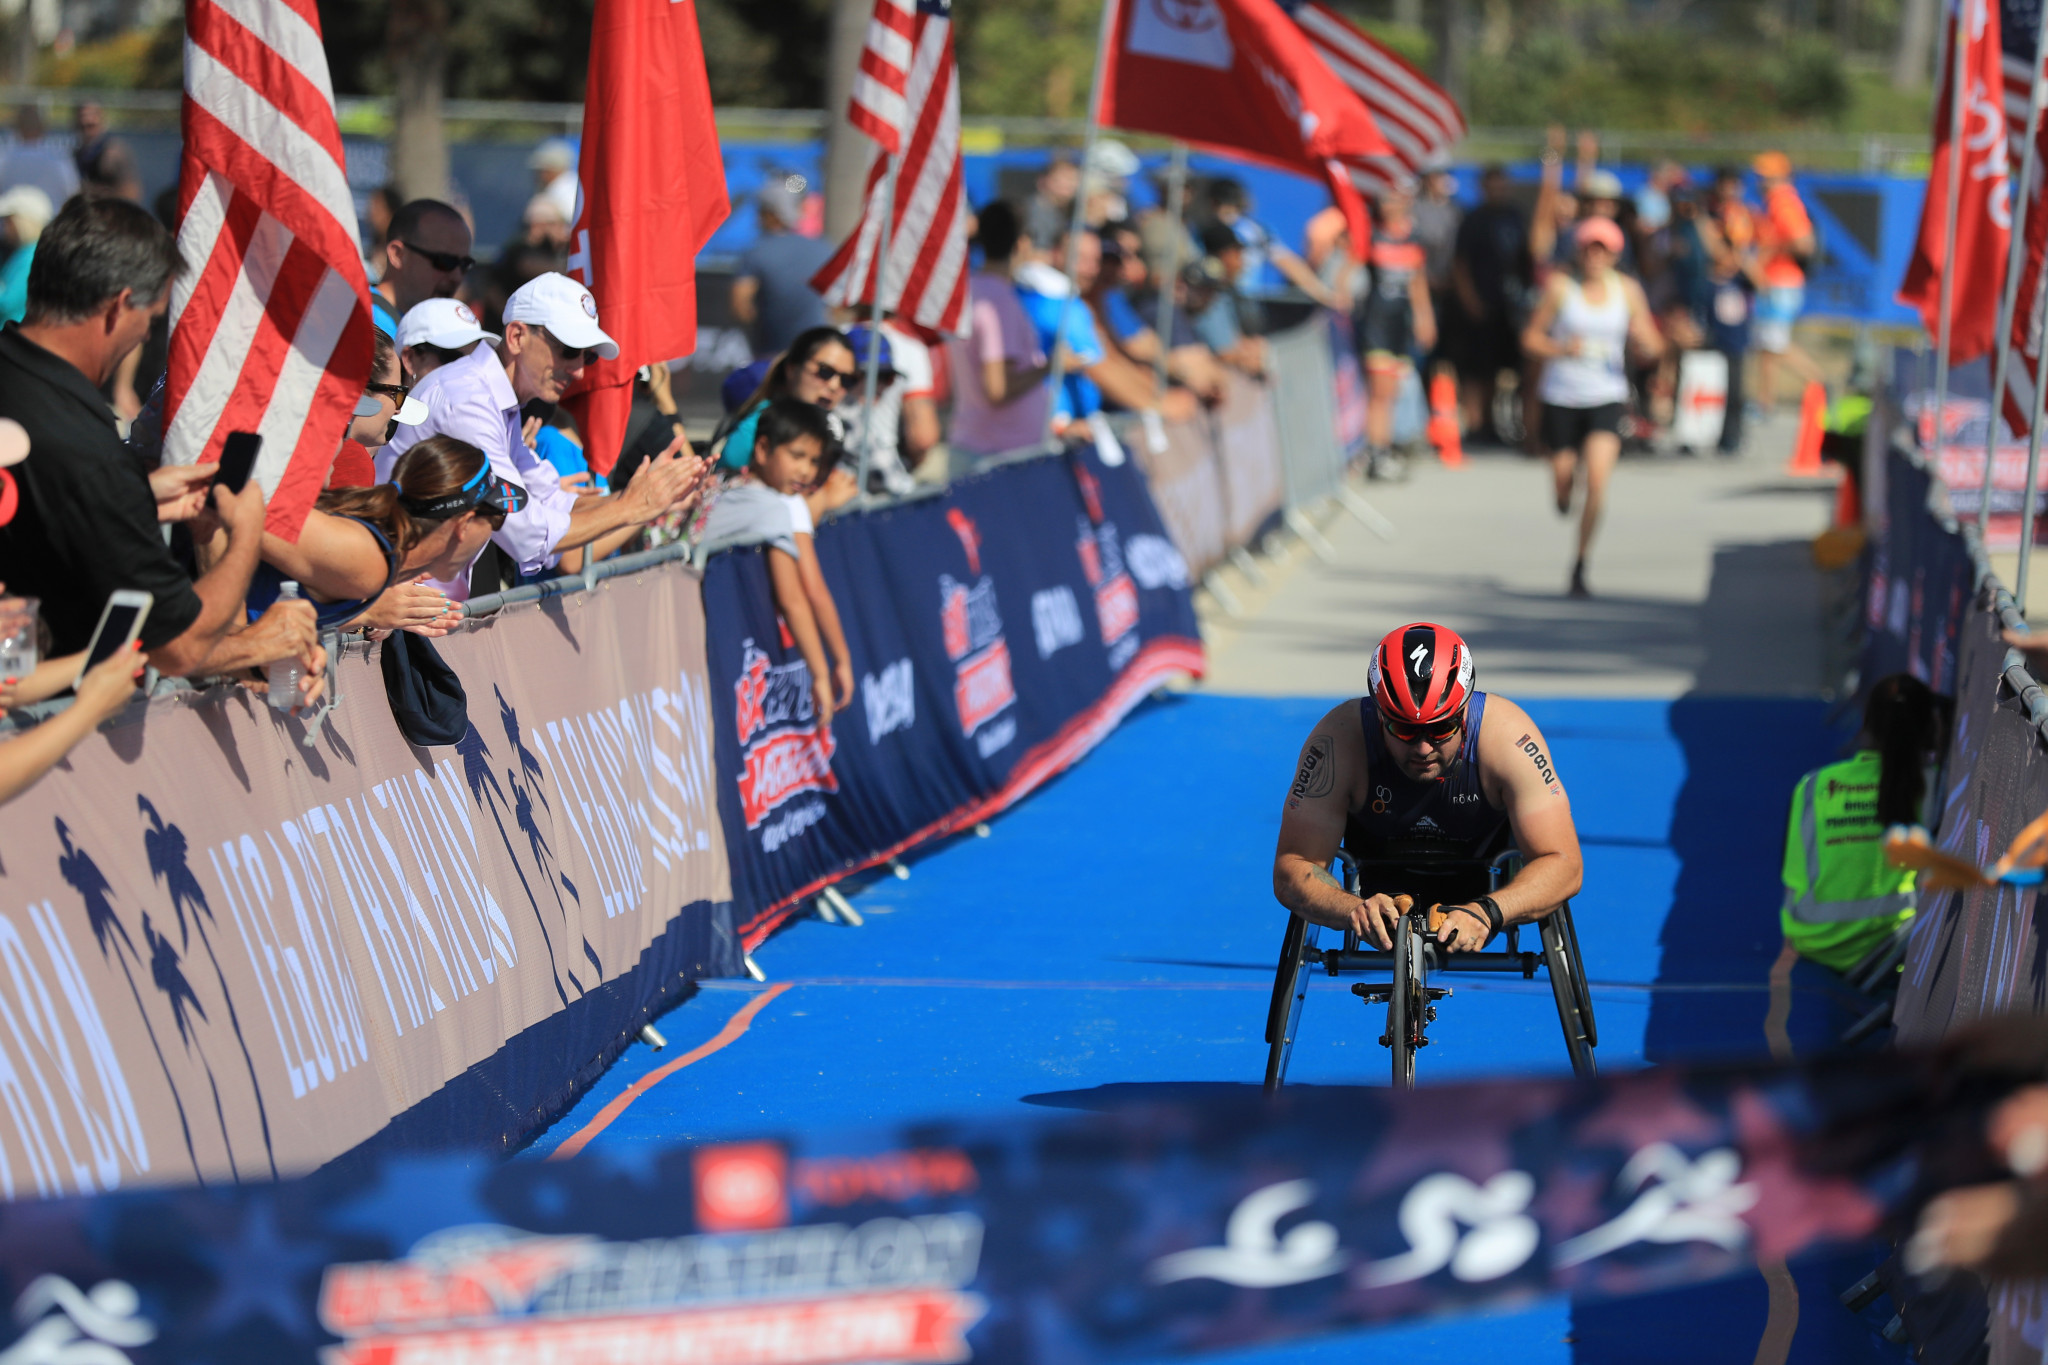 The USA Paratriathlon National Championships will be held as part of the event ©Getty Images